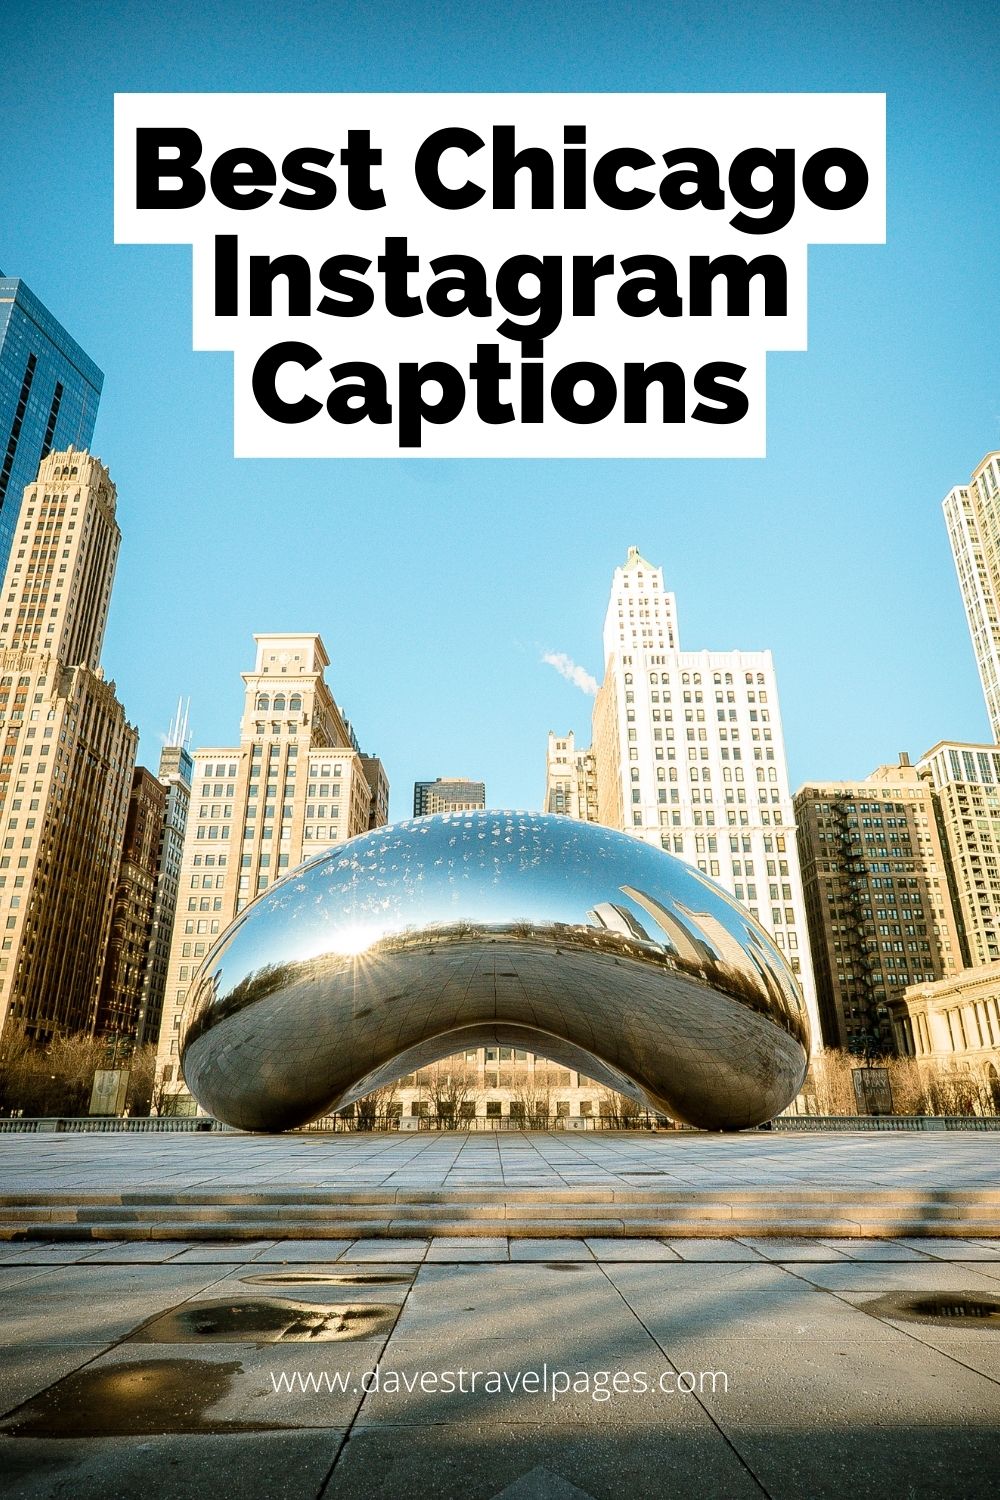 Instagram Captions About Chicago